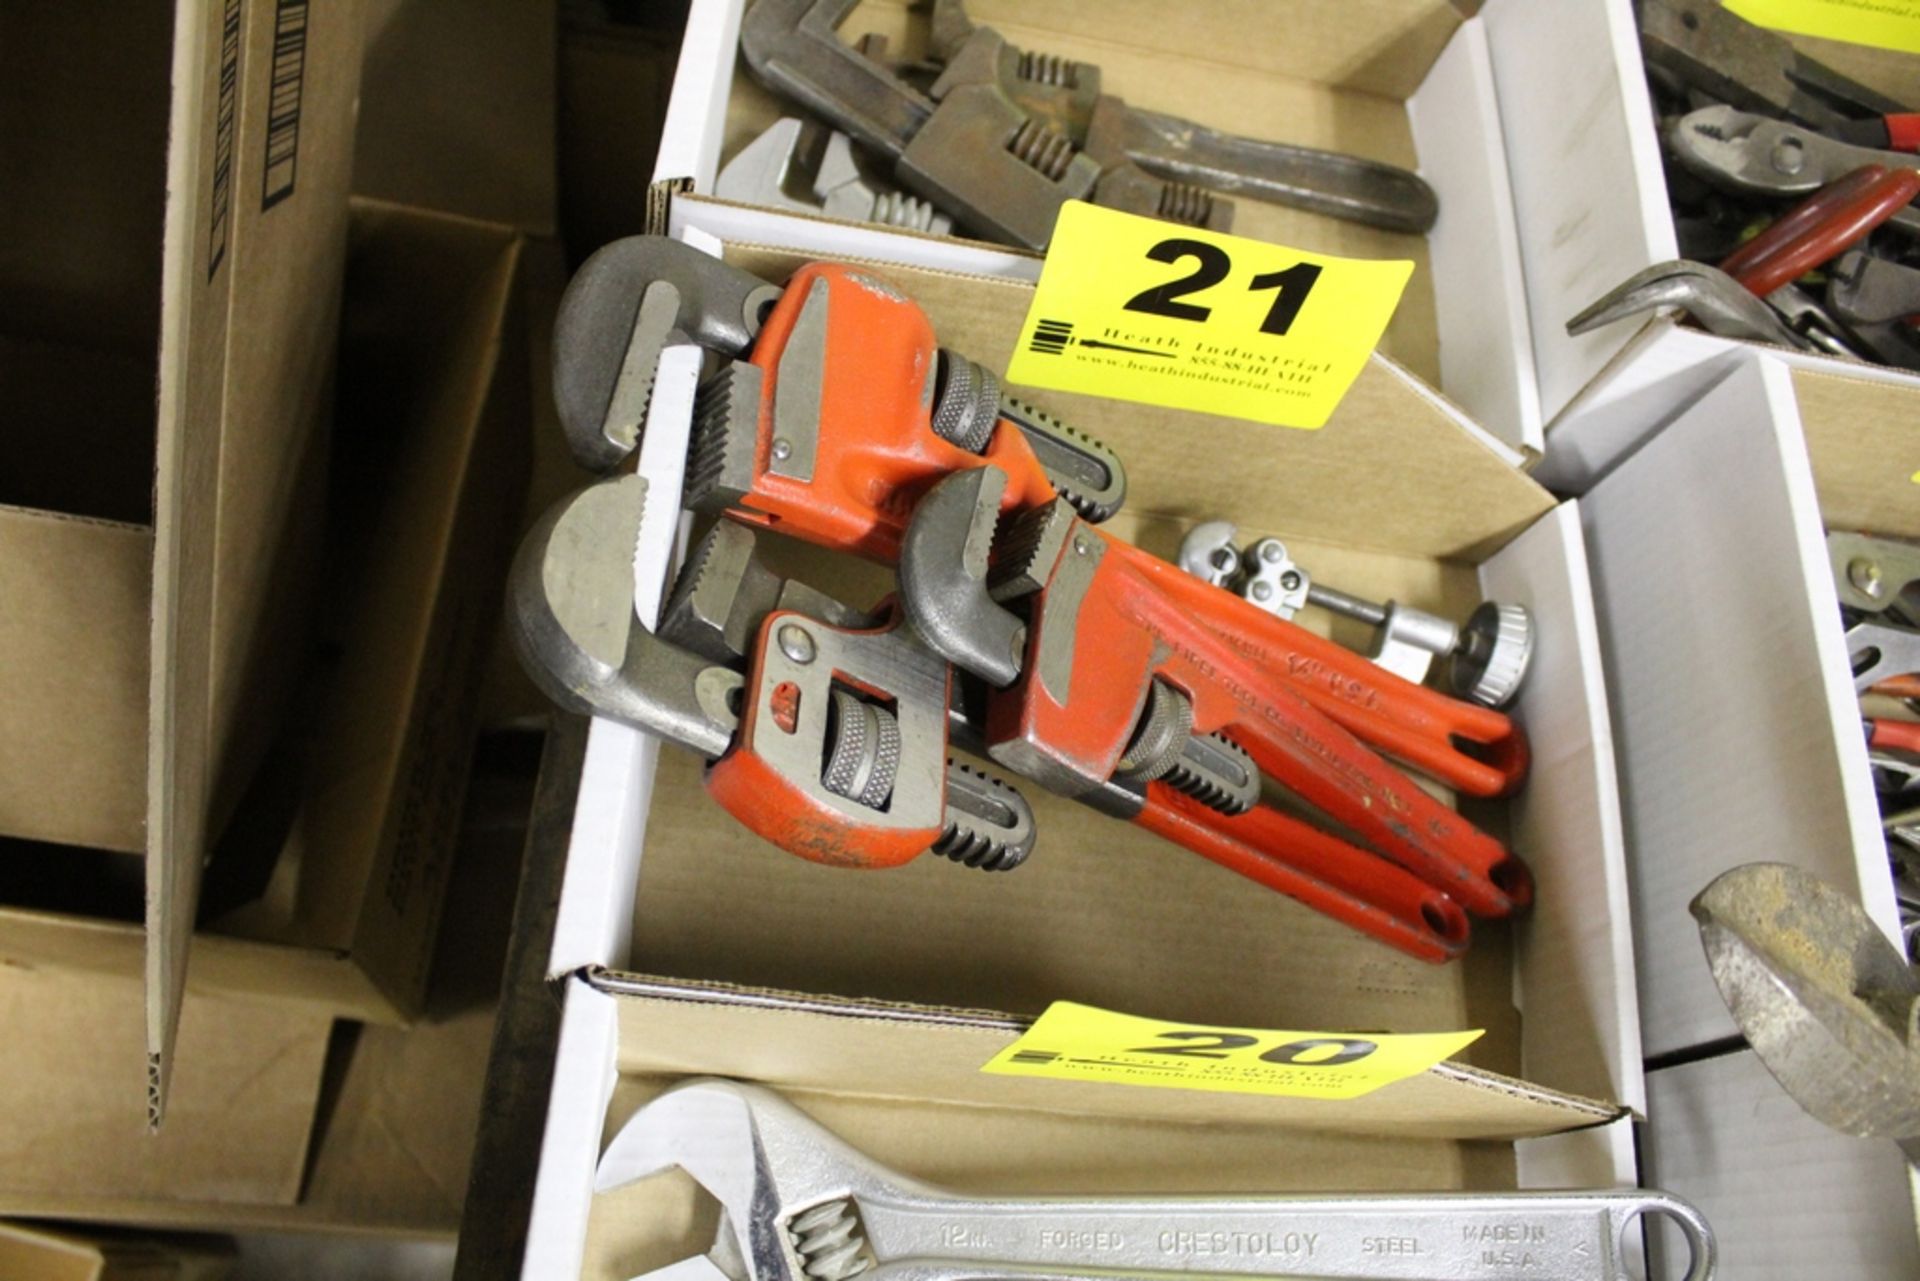 LOT OF (3) PIPE WRENCHES 10" TO 14" AND TUBING CUTTER